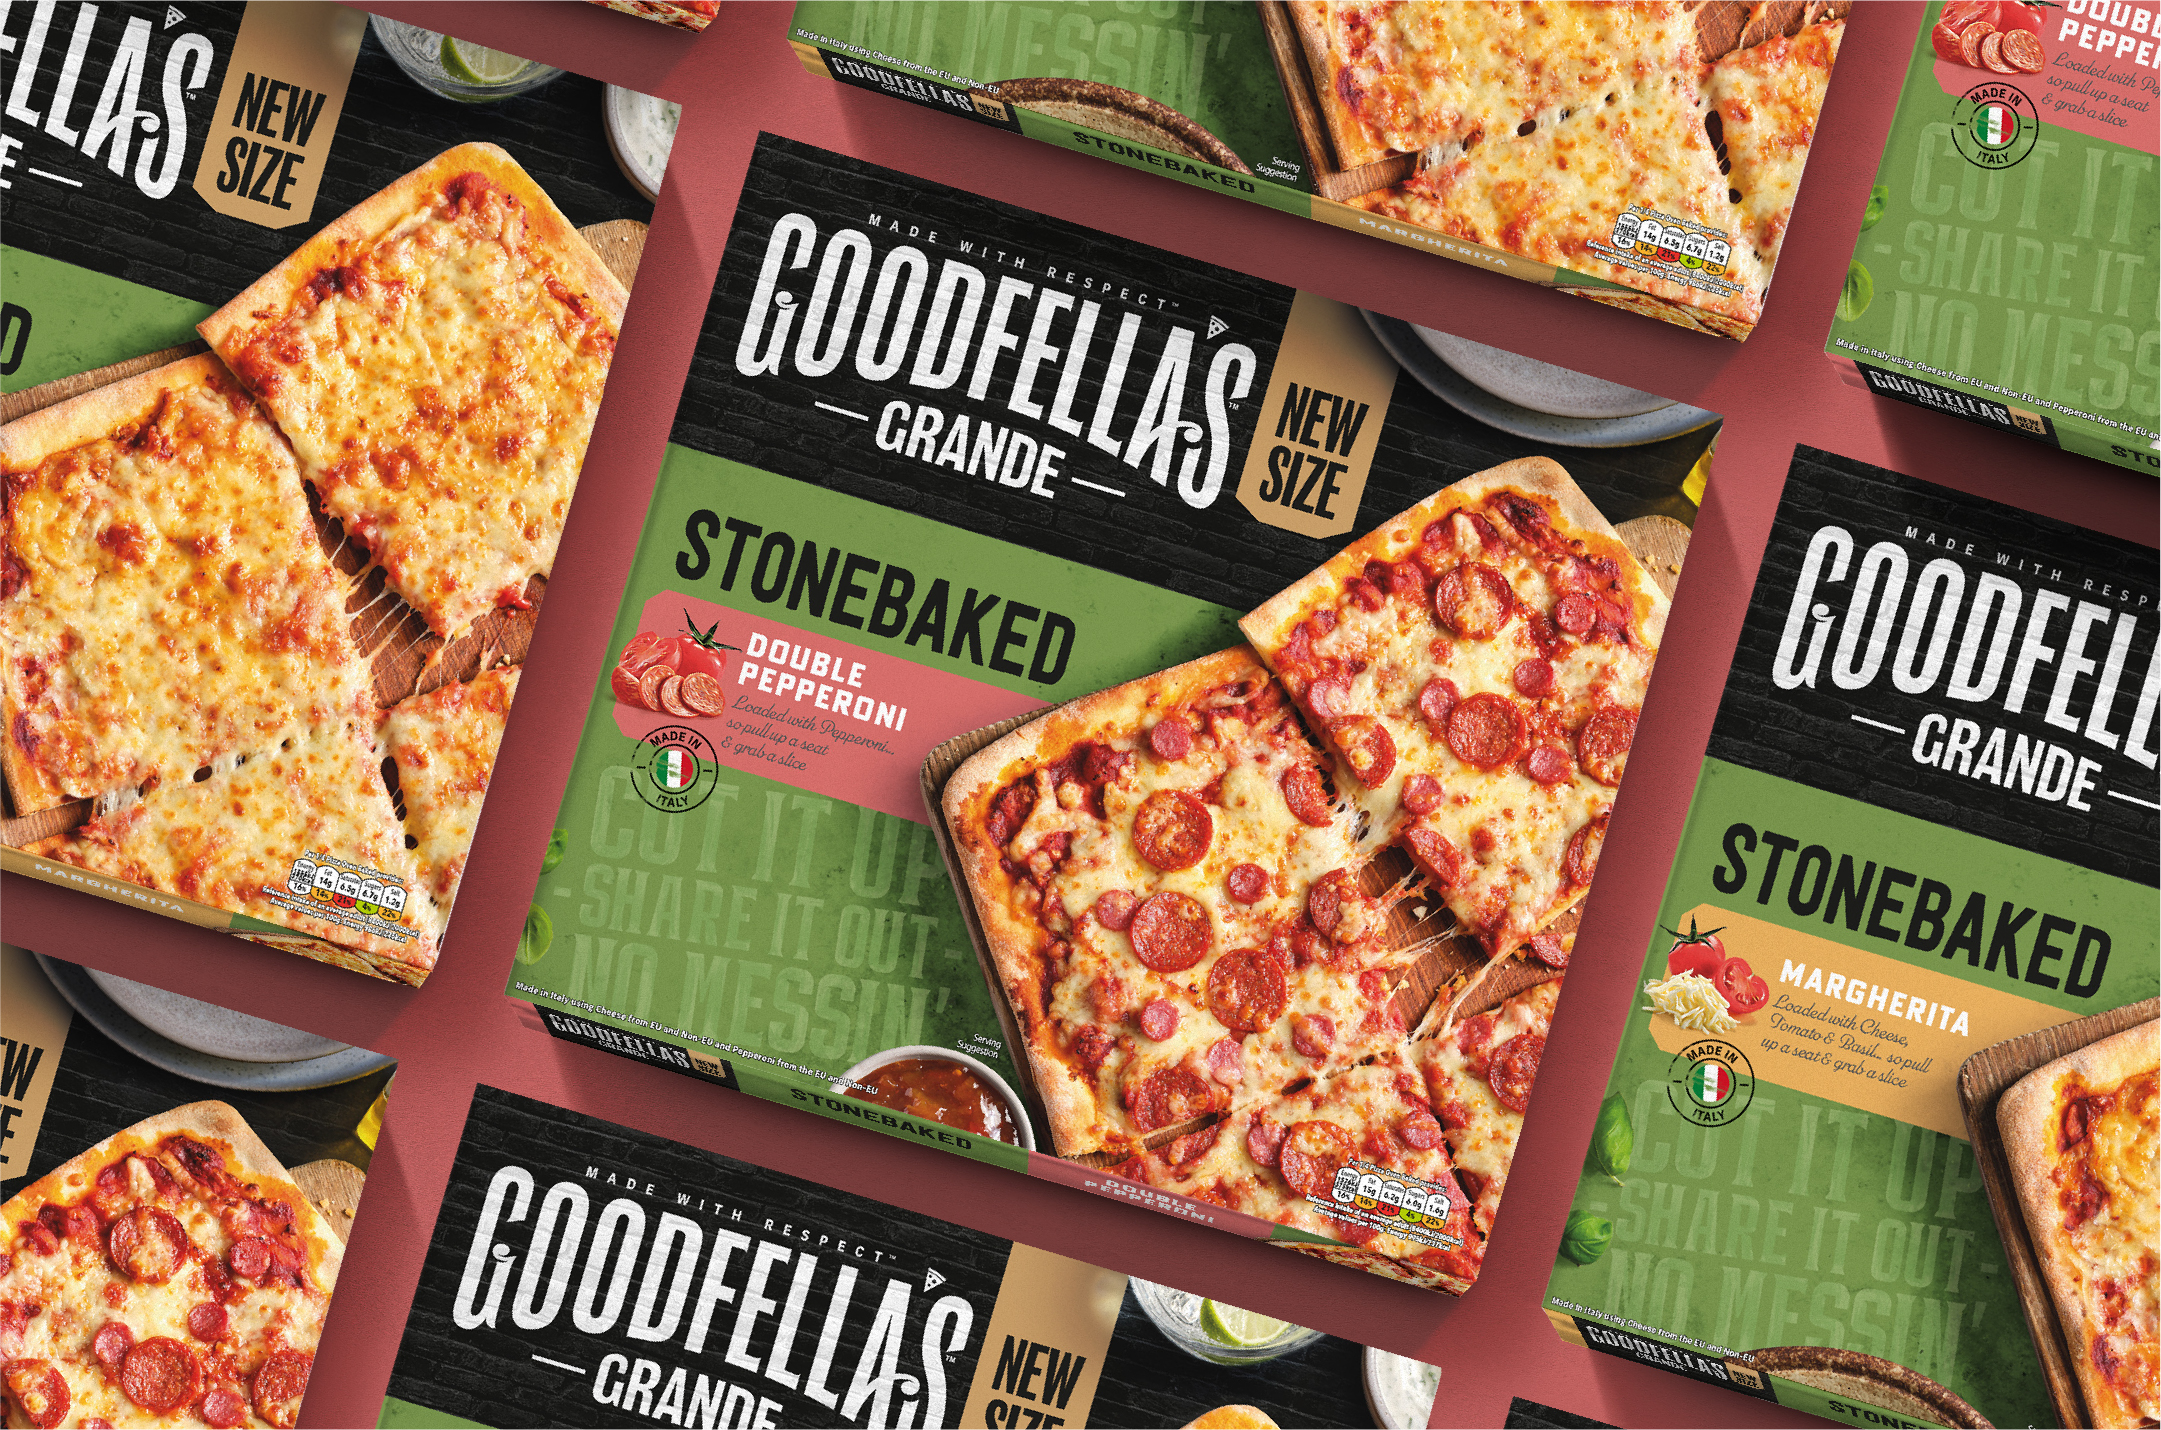 Goodfella’s goes Grande with new sharing pizza image